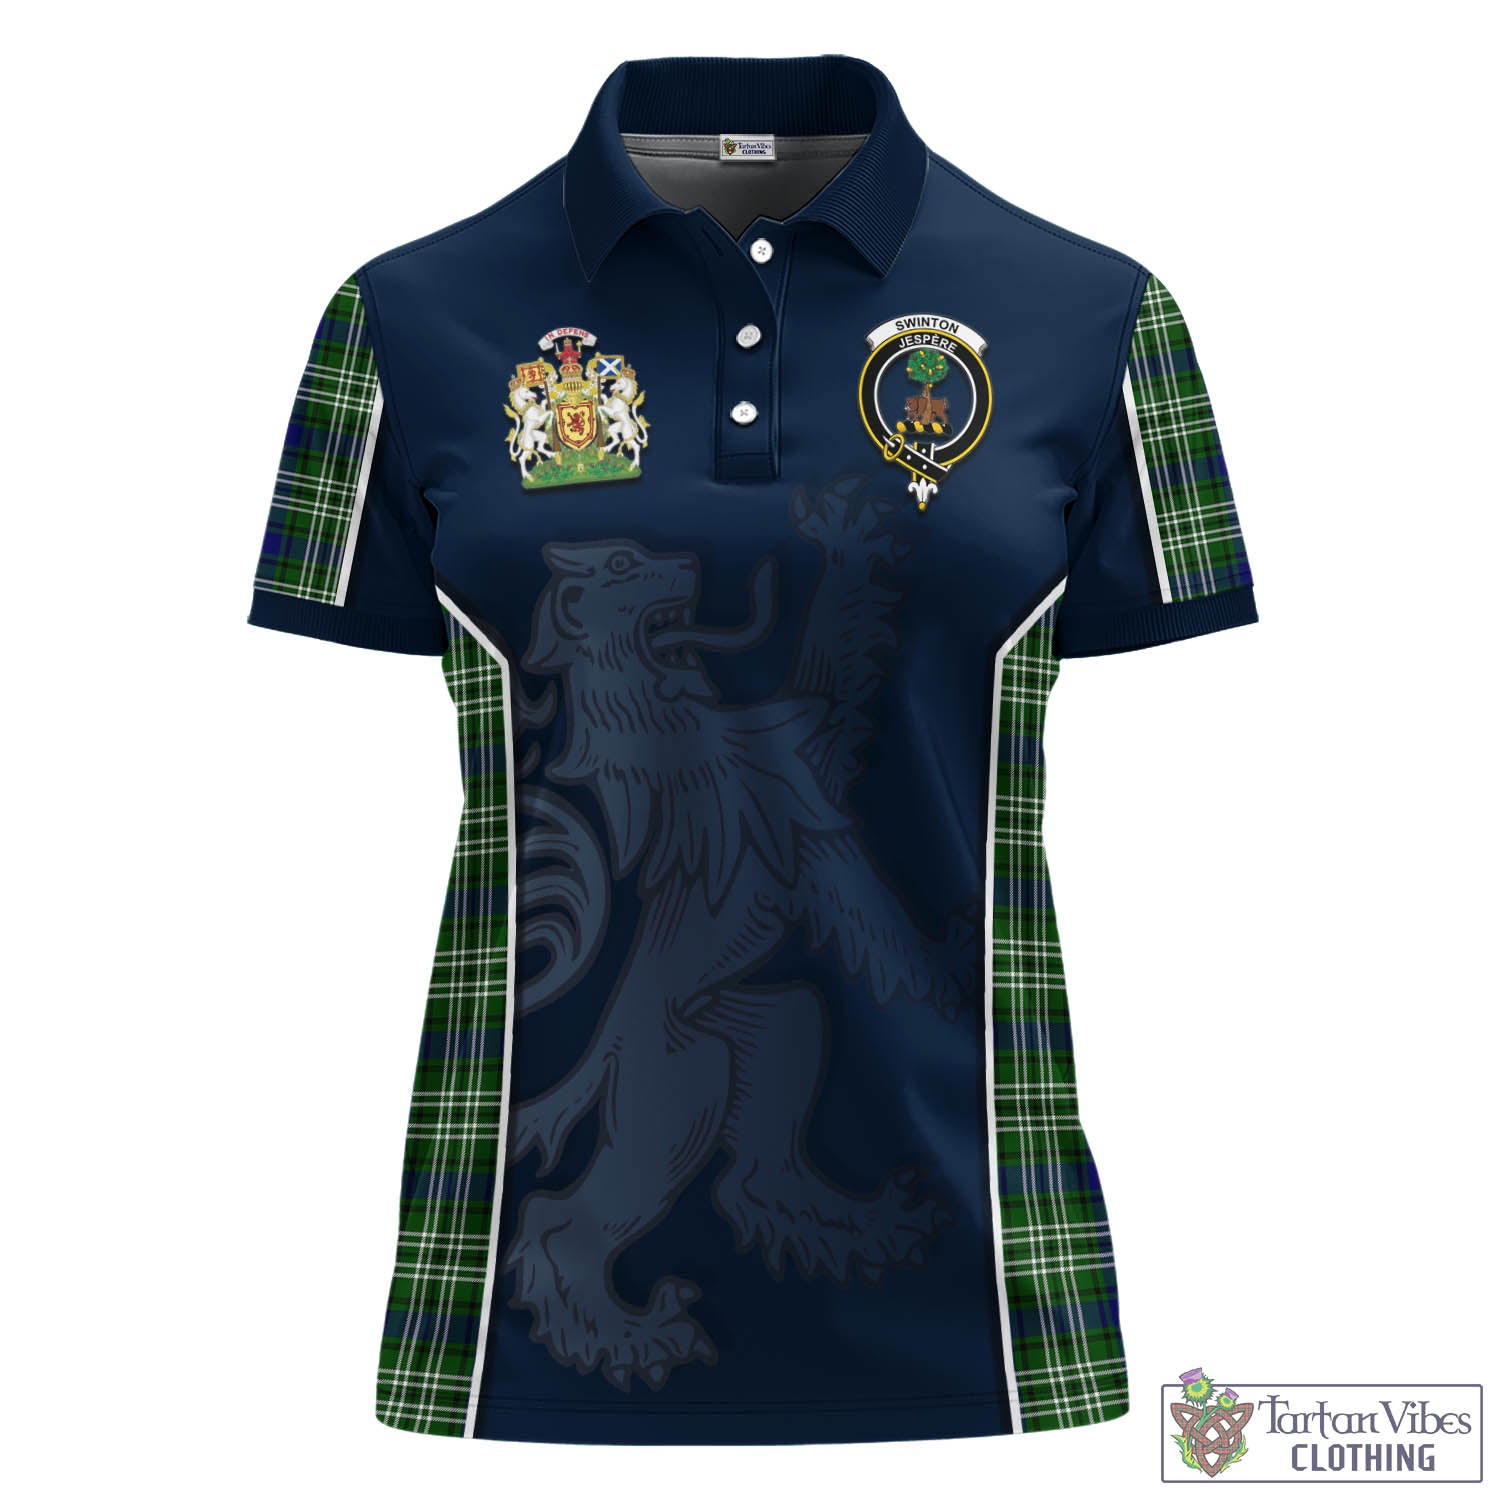 Tartan Vibes Clothing Swinton Tartan Women's Polo Shirt with Family Crest and Lion Rampant Vibes Sport Style